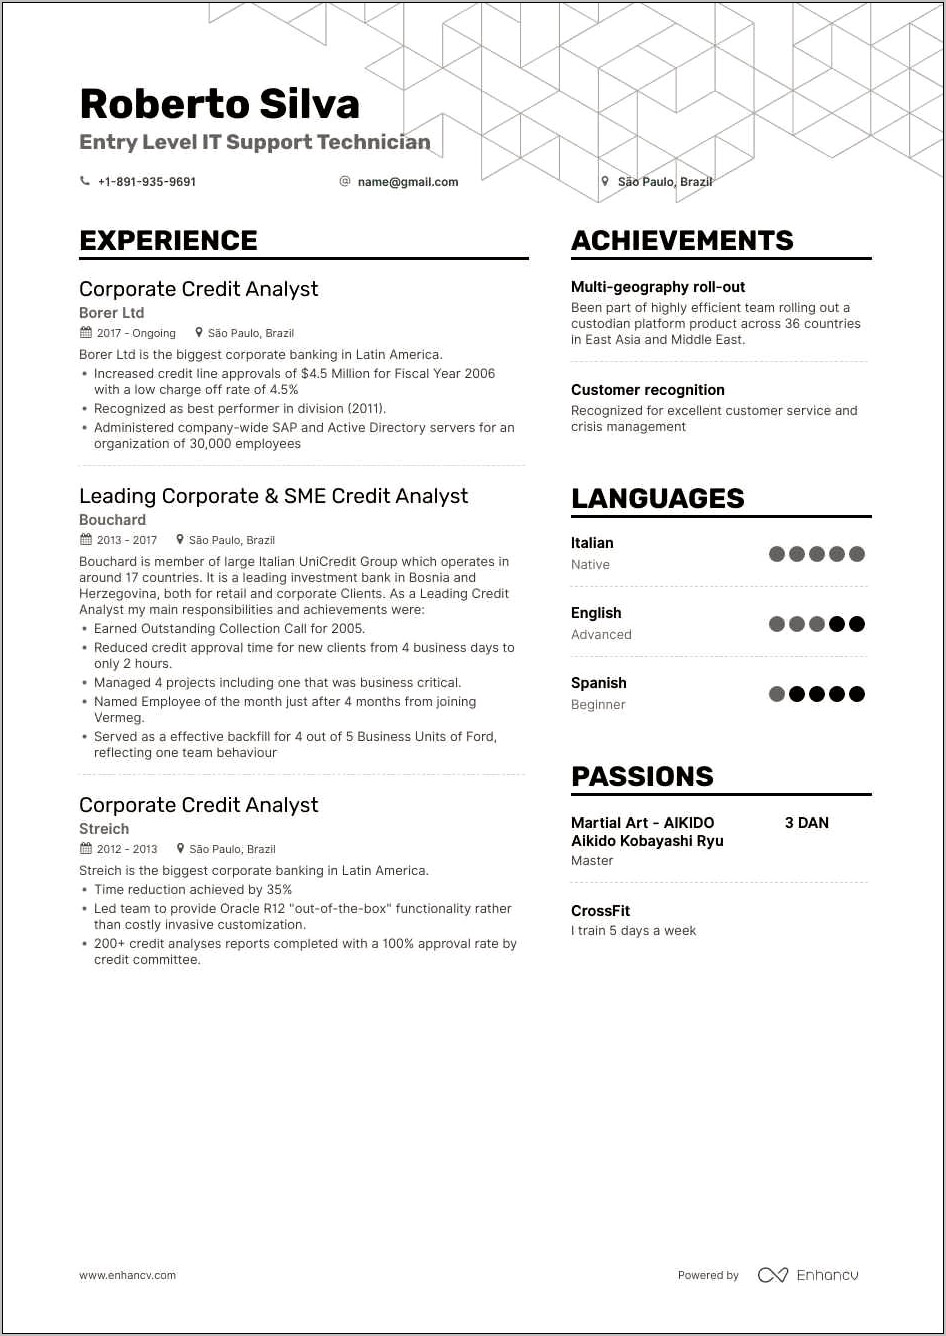 Entry Level Cyber Security Analyst Resume Sample